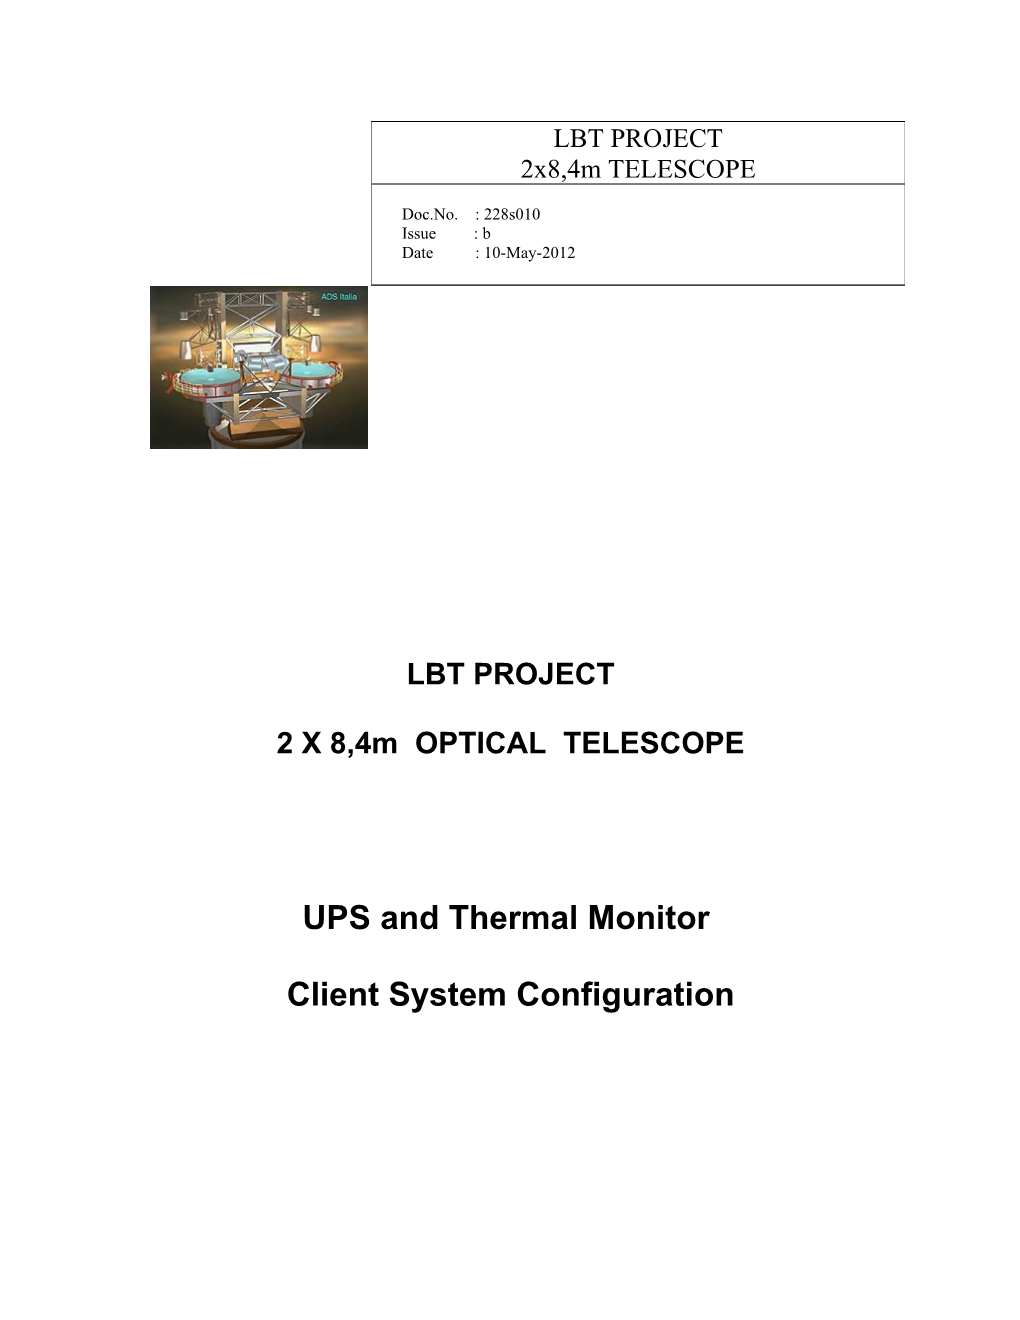 LBT PROJECT 2 X 8,4M OPTICAL TELESCOPE UPS and Thermal Monitor Client System Configuration